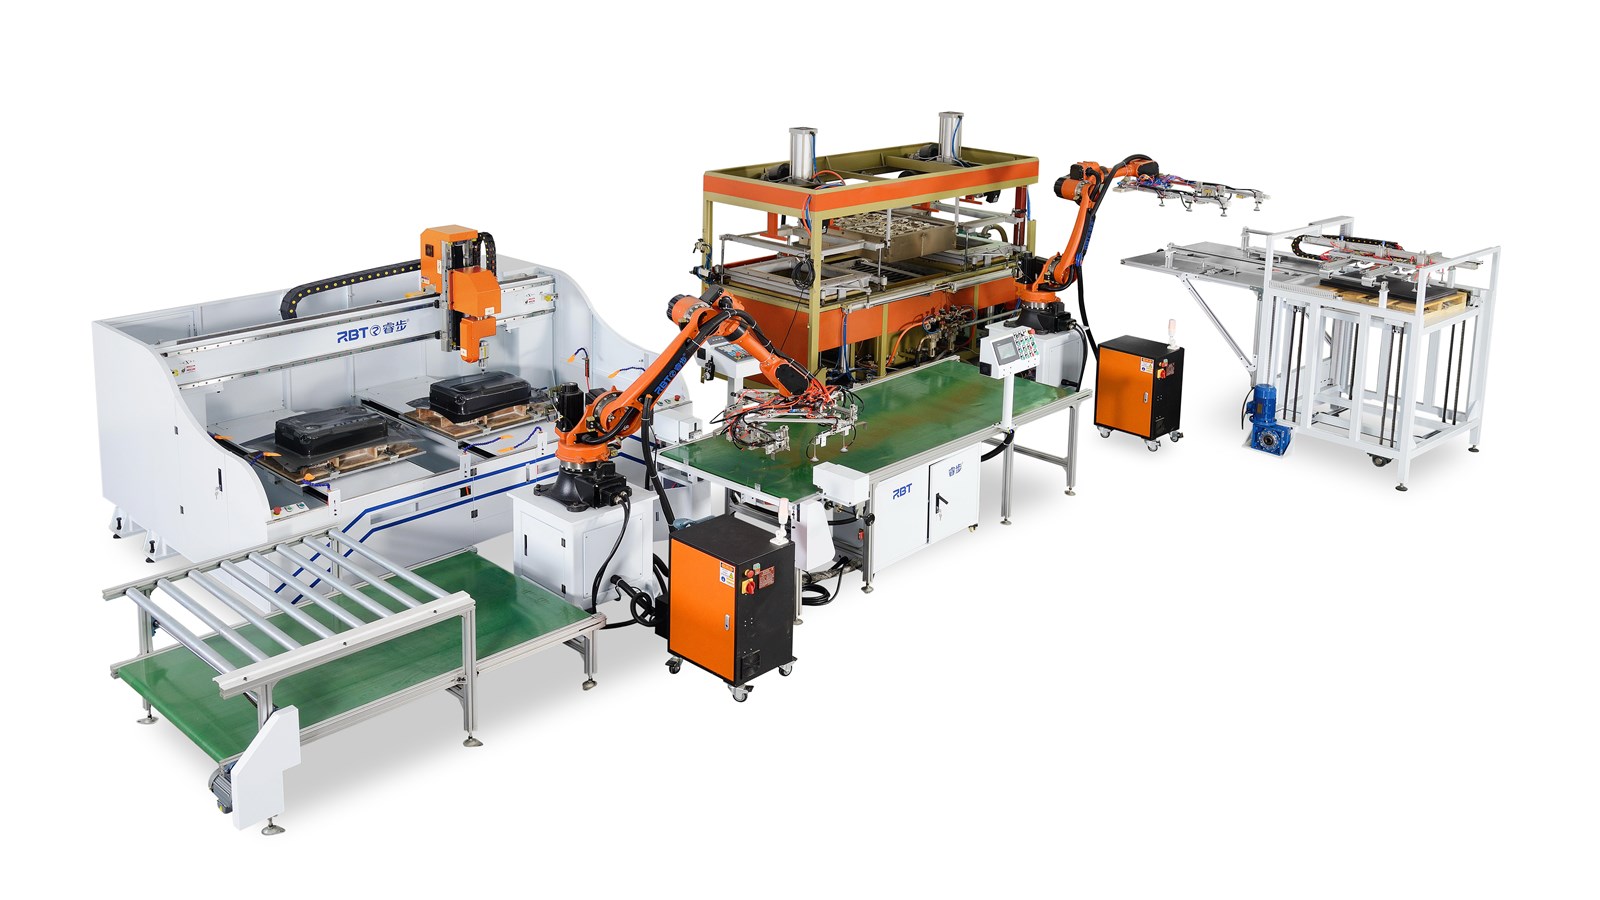 Rbt Fully Automatic Vacuum Foming Punching and Cutting Machine with Robotic Loading and Unloading for ABS PC PP PE Lugg